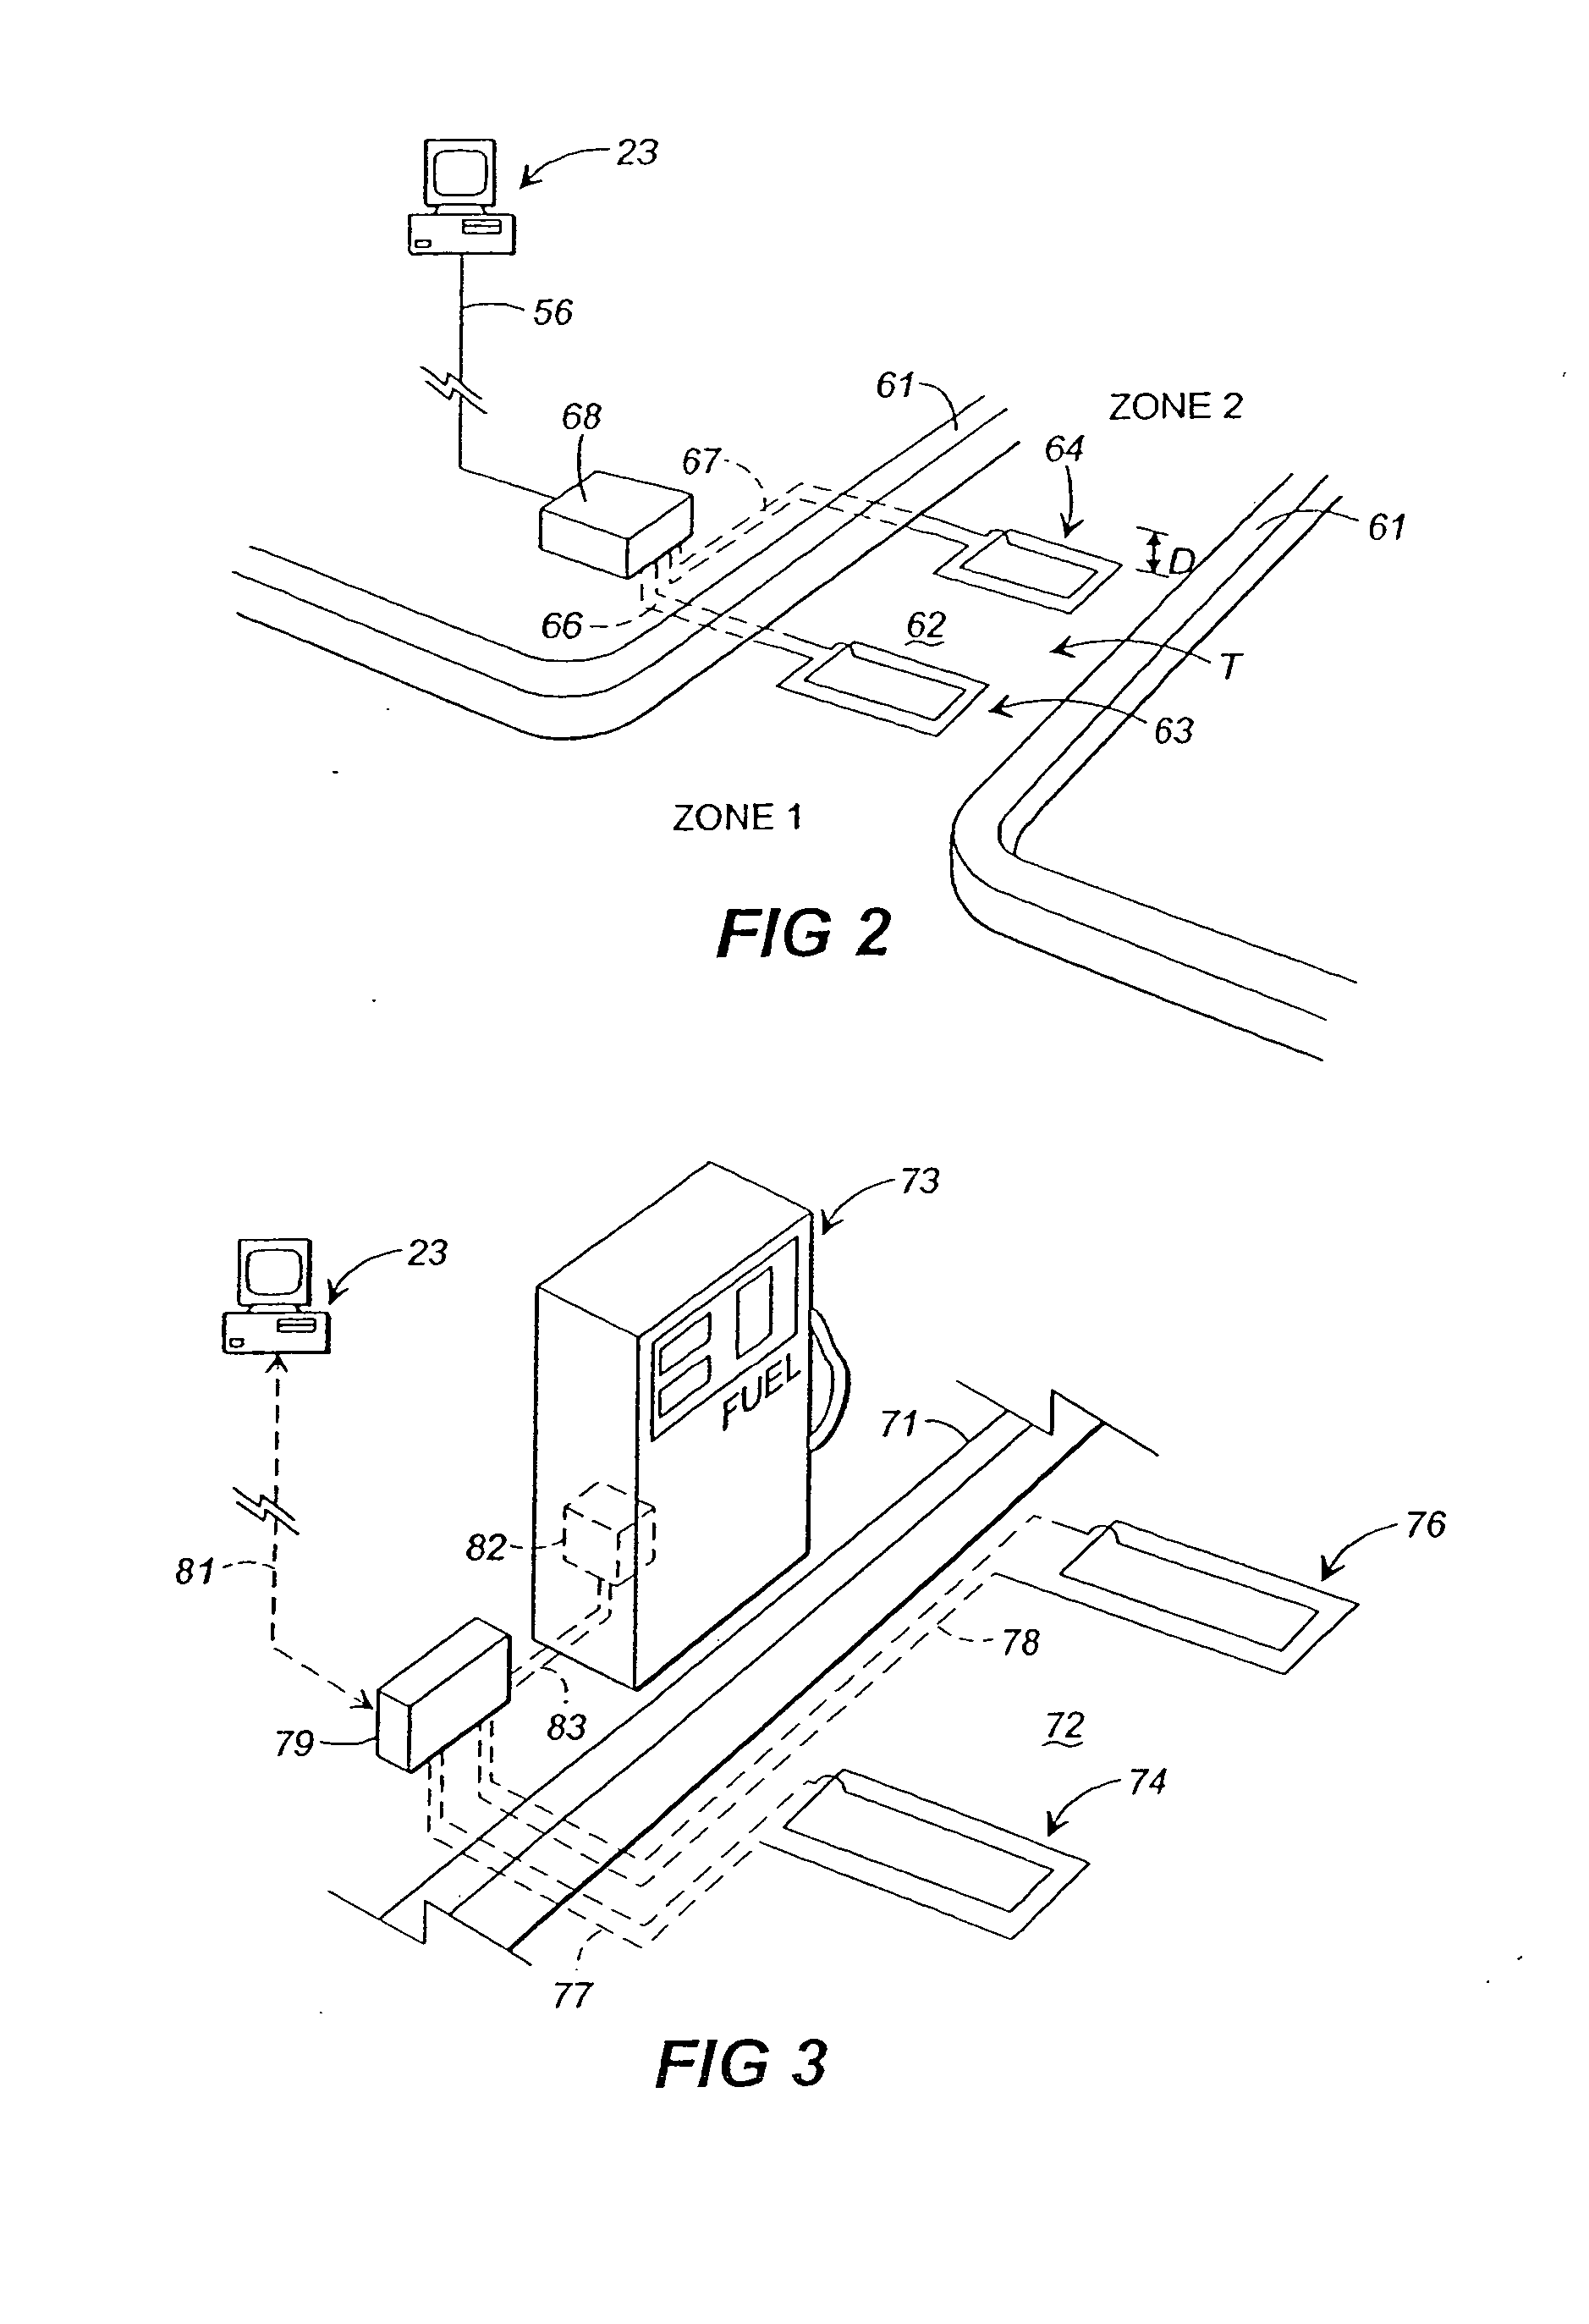 Object control and tracking system with zonal transition detection